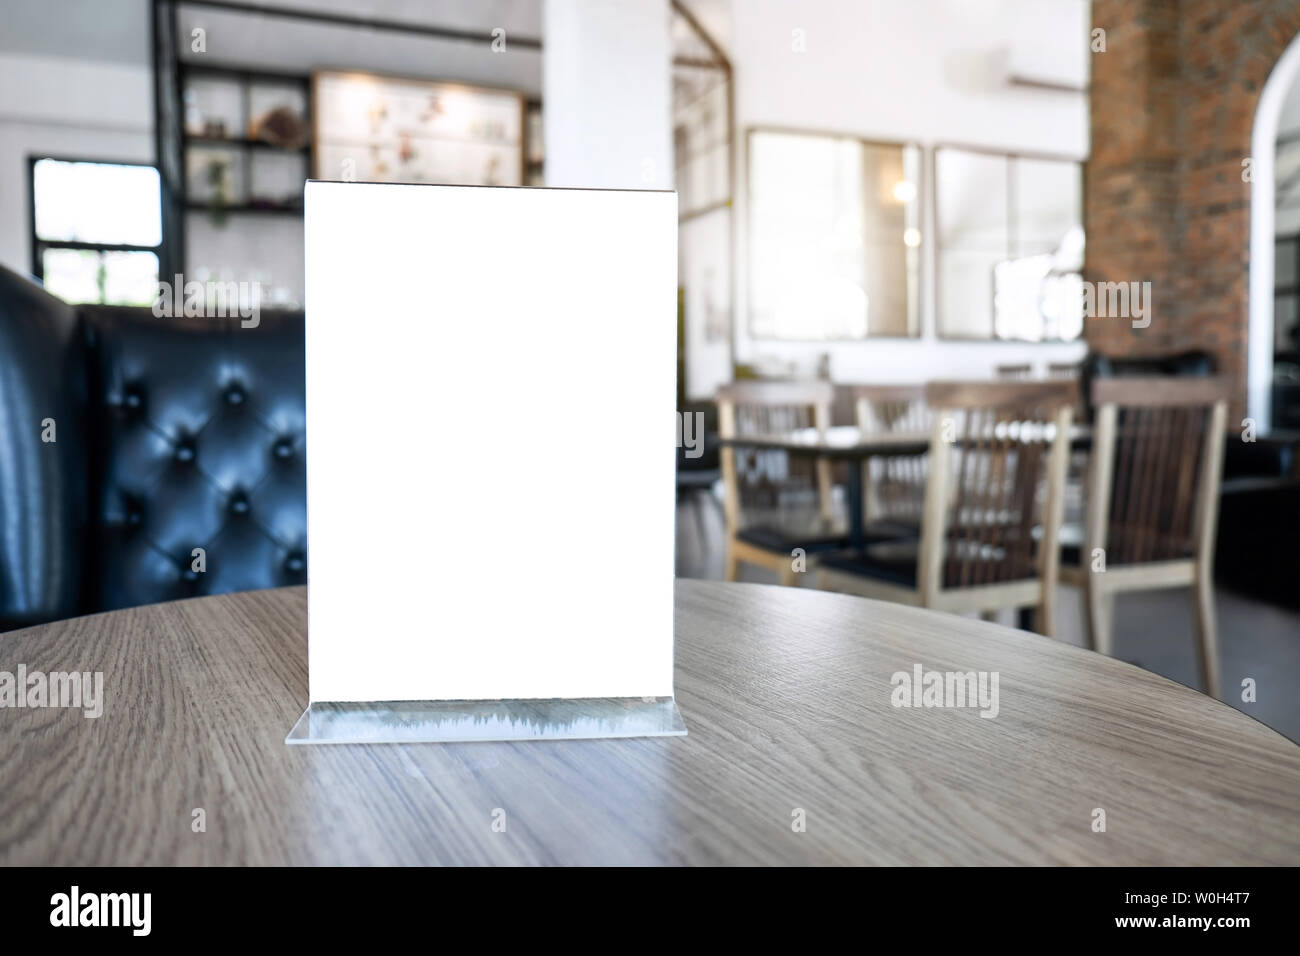 Blank screen mock up menu frame standing on wood table in coffee cafe and restaurant background. Stock Photo